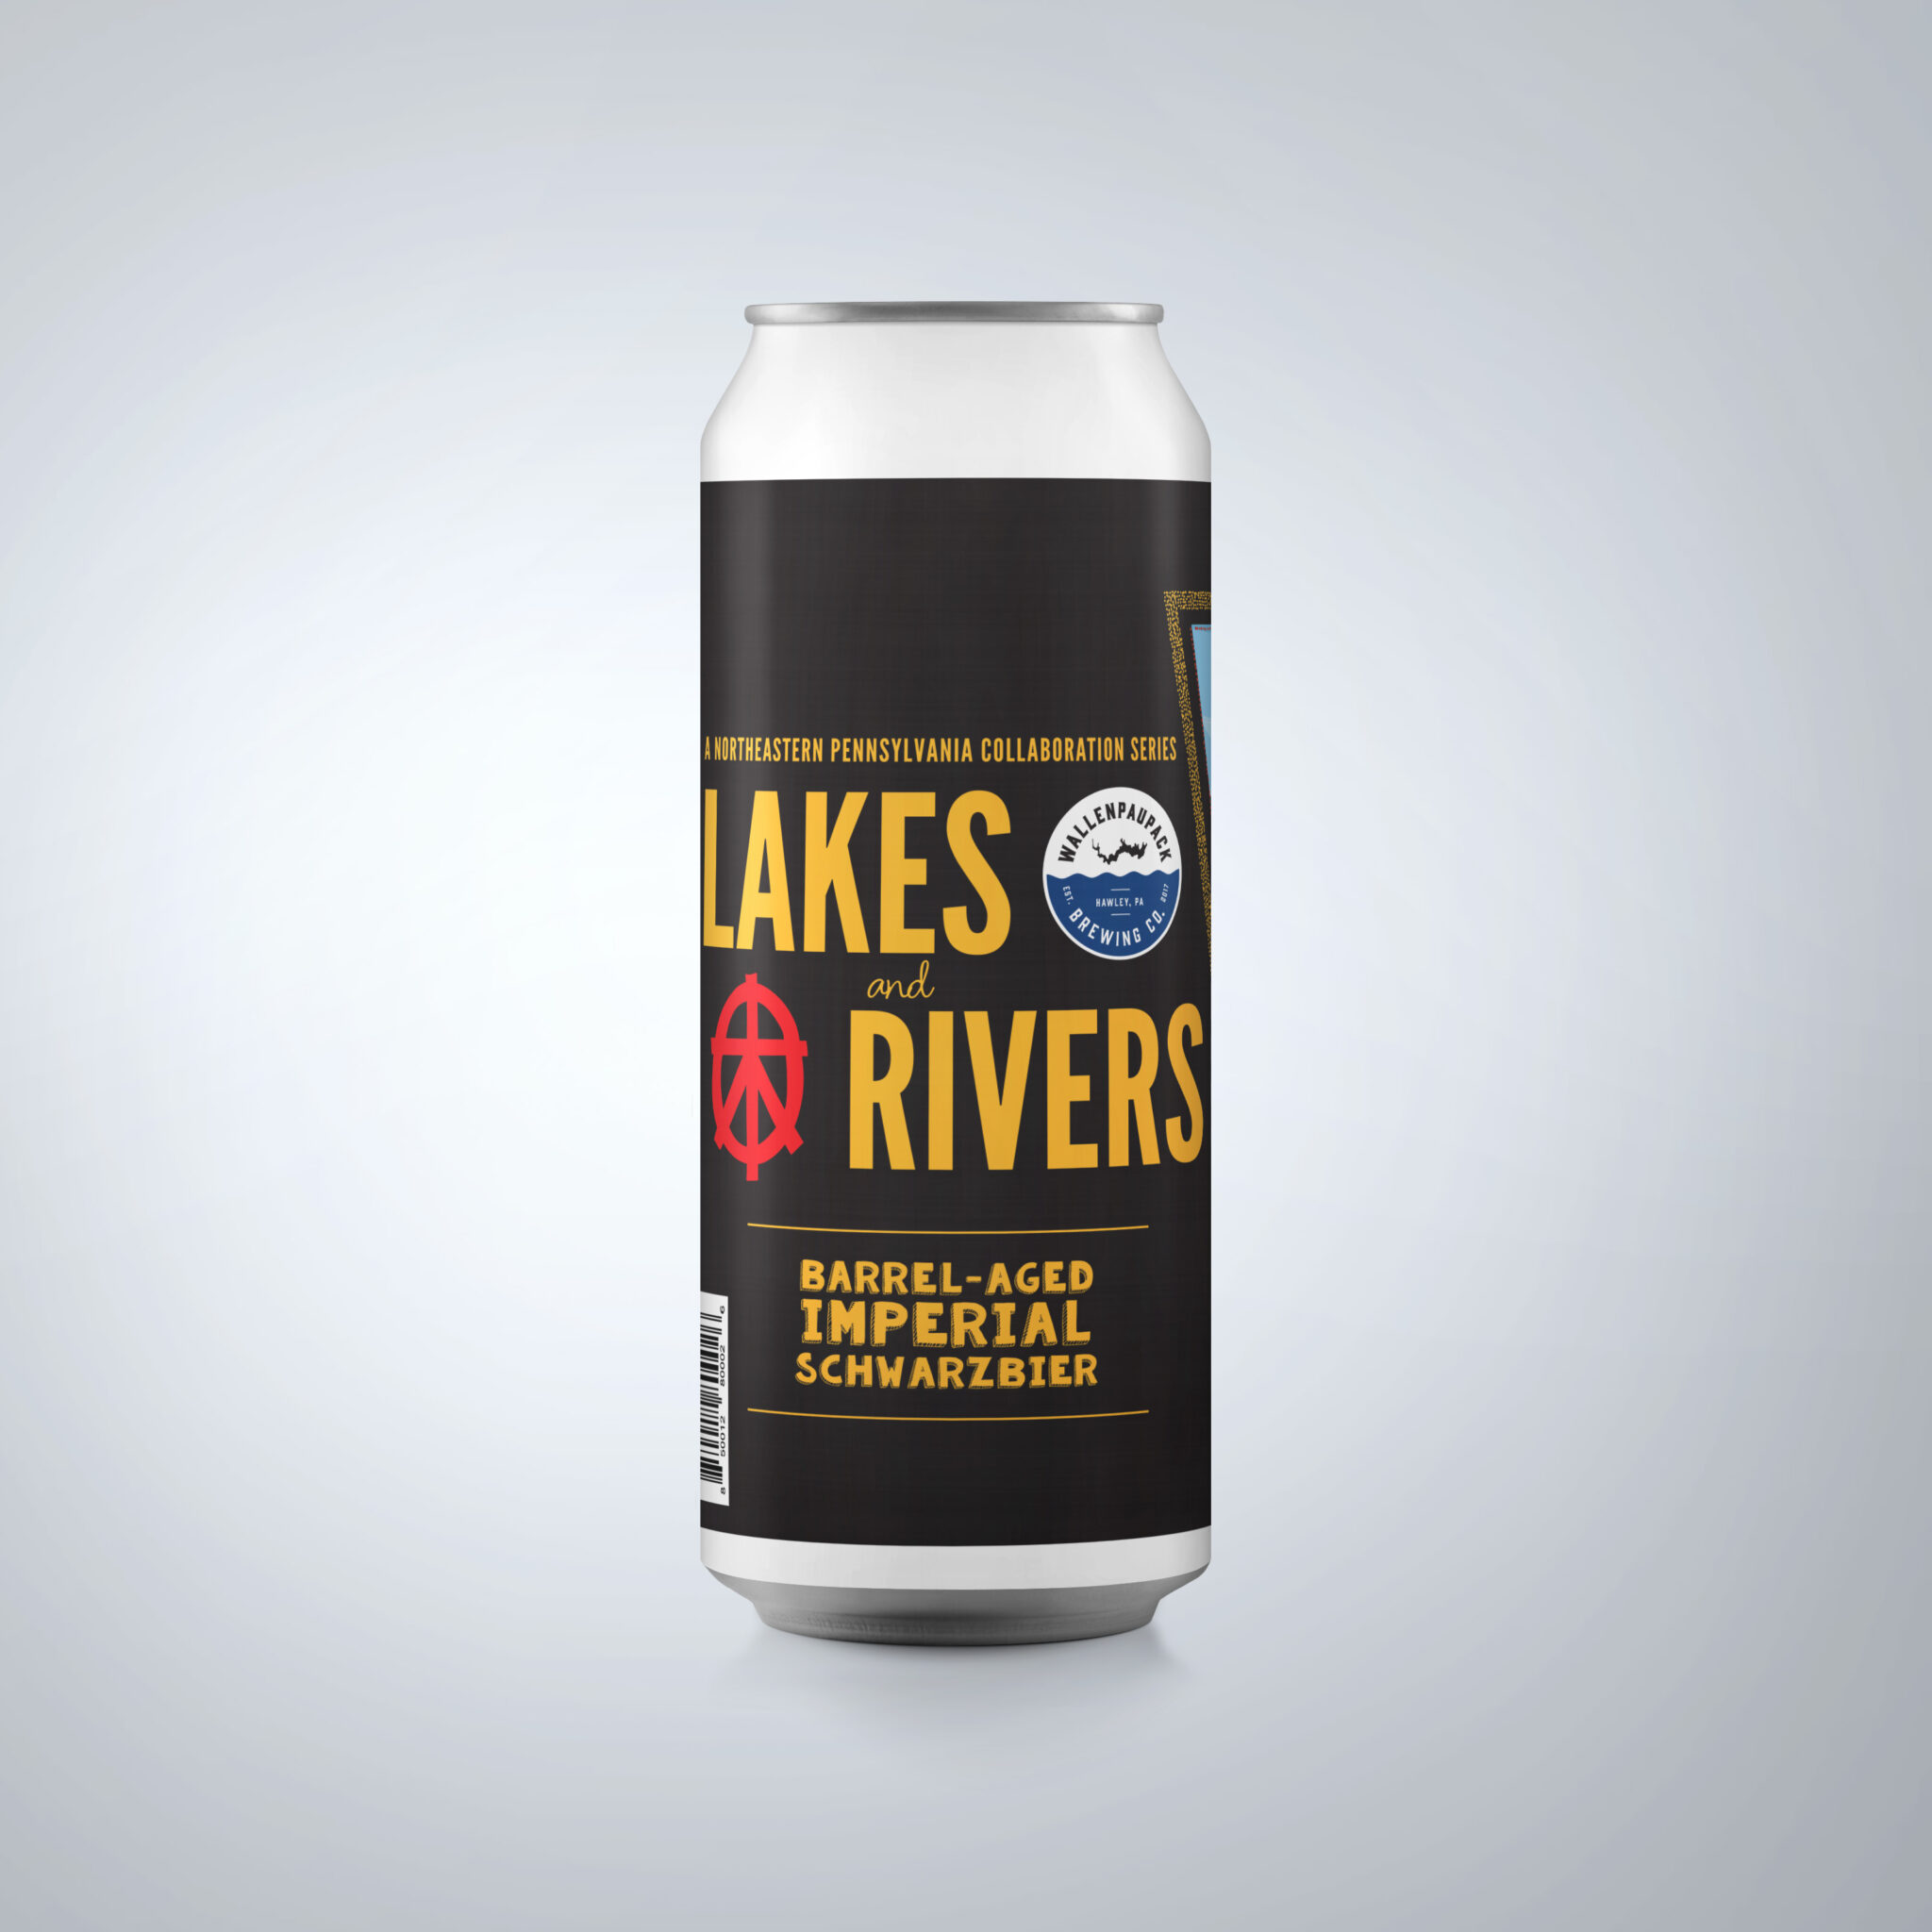 Laks&Rivers_16oz_Can_Template